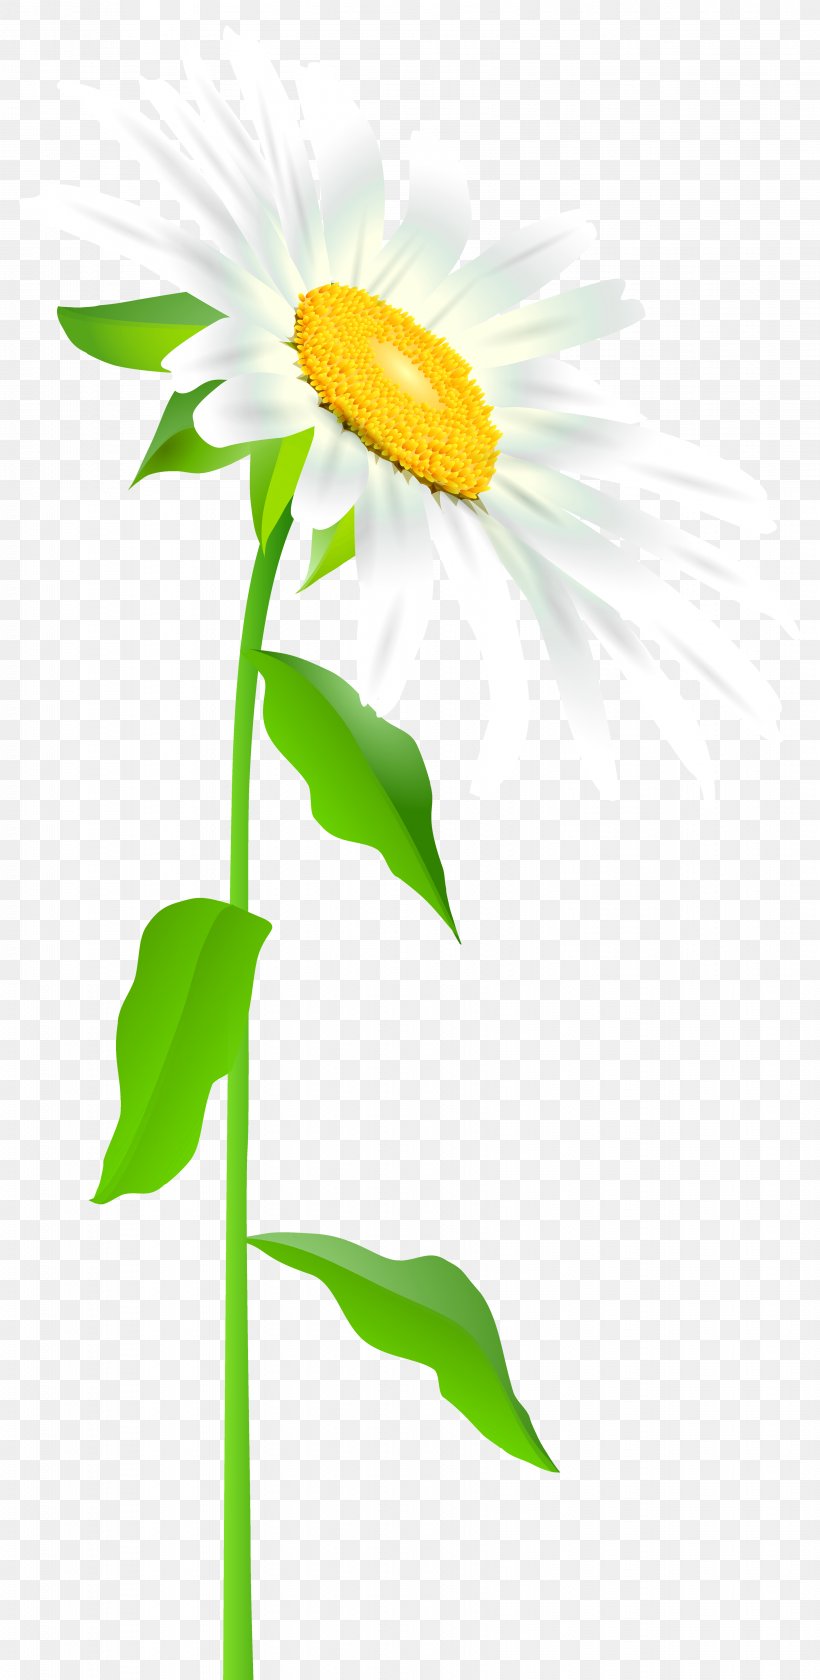 Clip Art, PNG, 3416x7000px, Common Sunflower, Animation, Daisy, Daisy Family, Dandelion Download Free